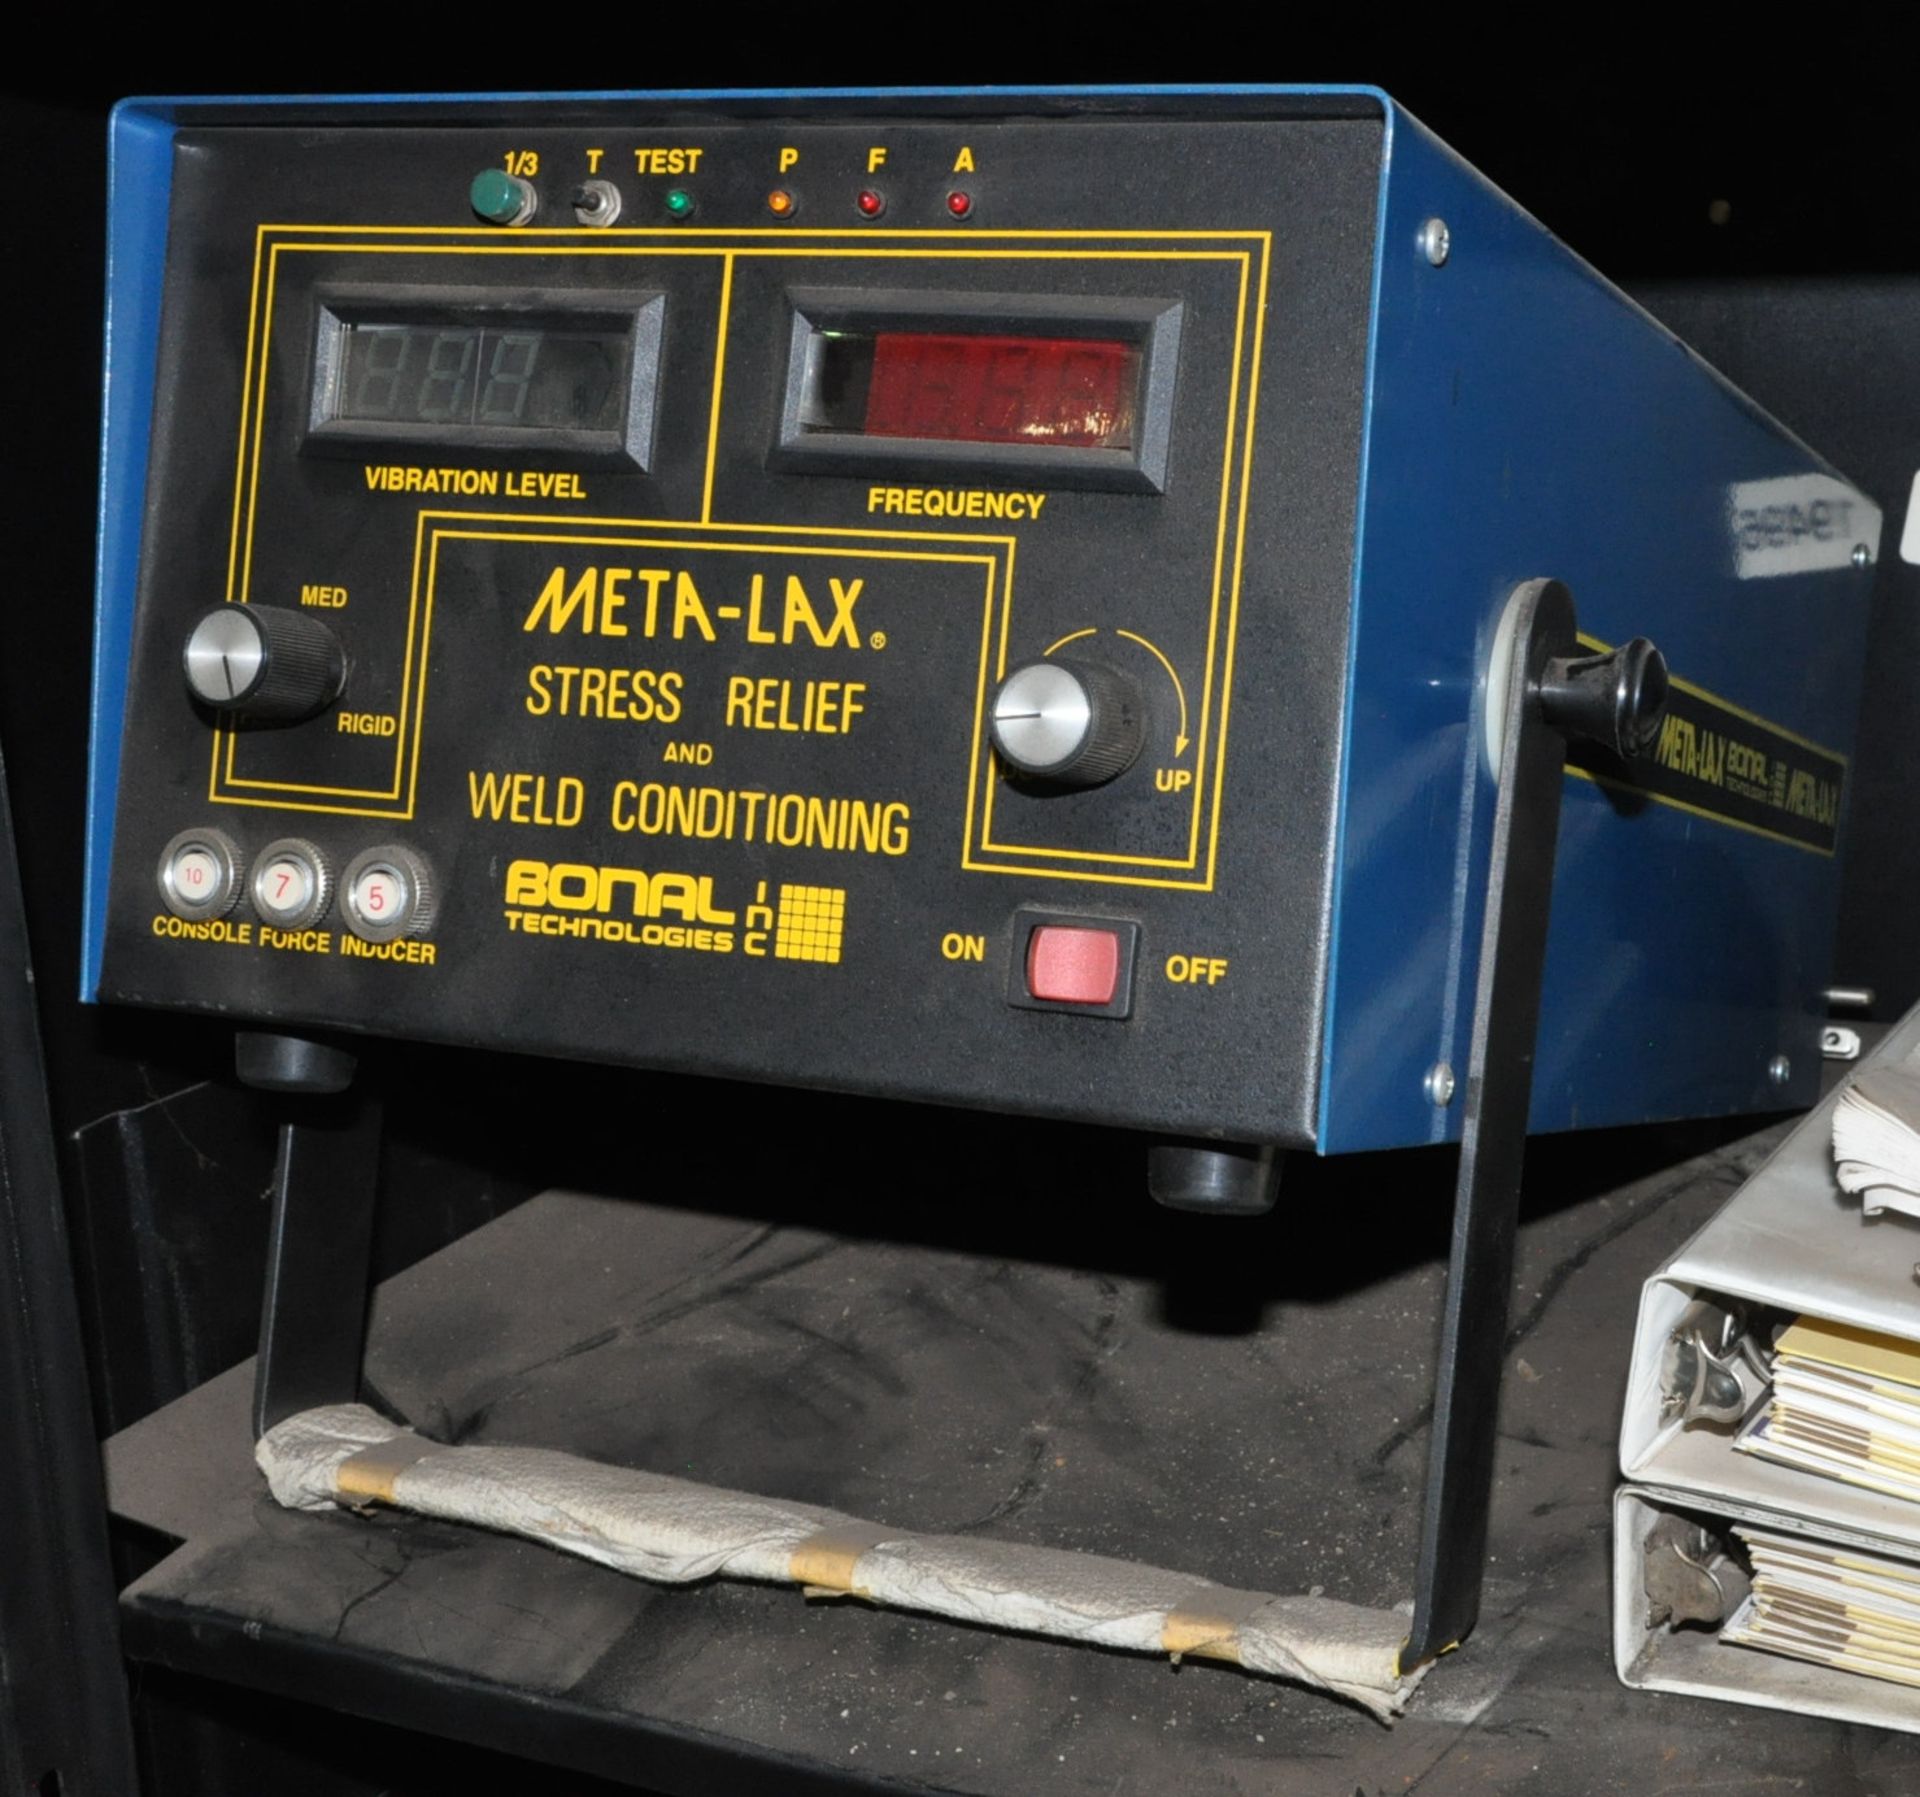 Bonal Technologies Meta-Lax Stress Relief and Weld Conditioning System with Portable Cabinet - Image 3 of 3